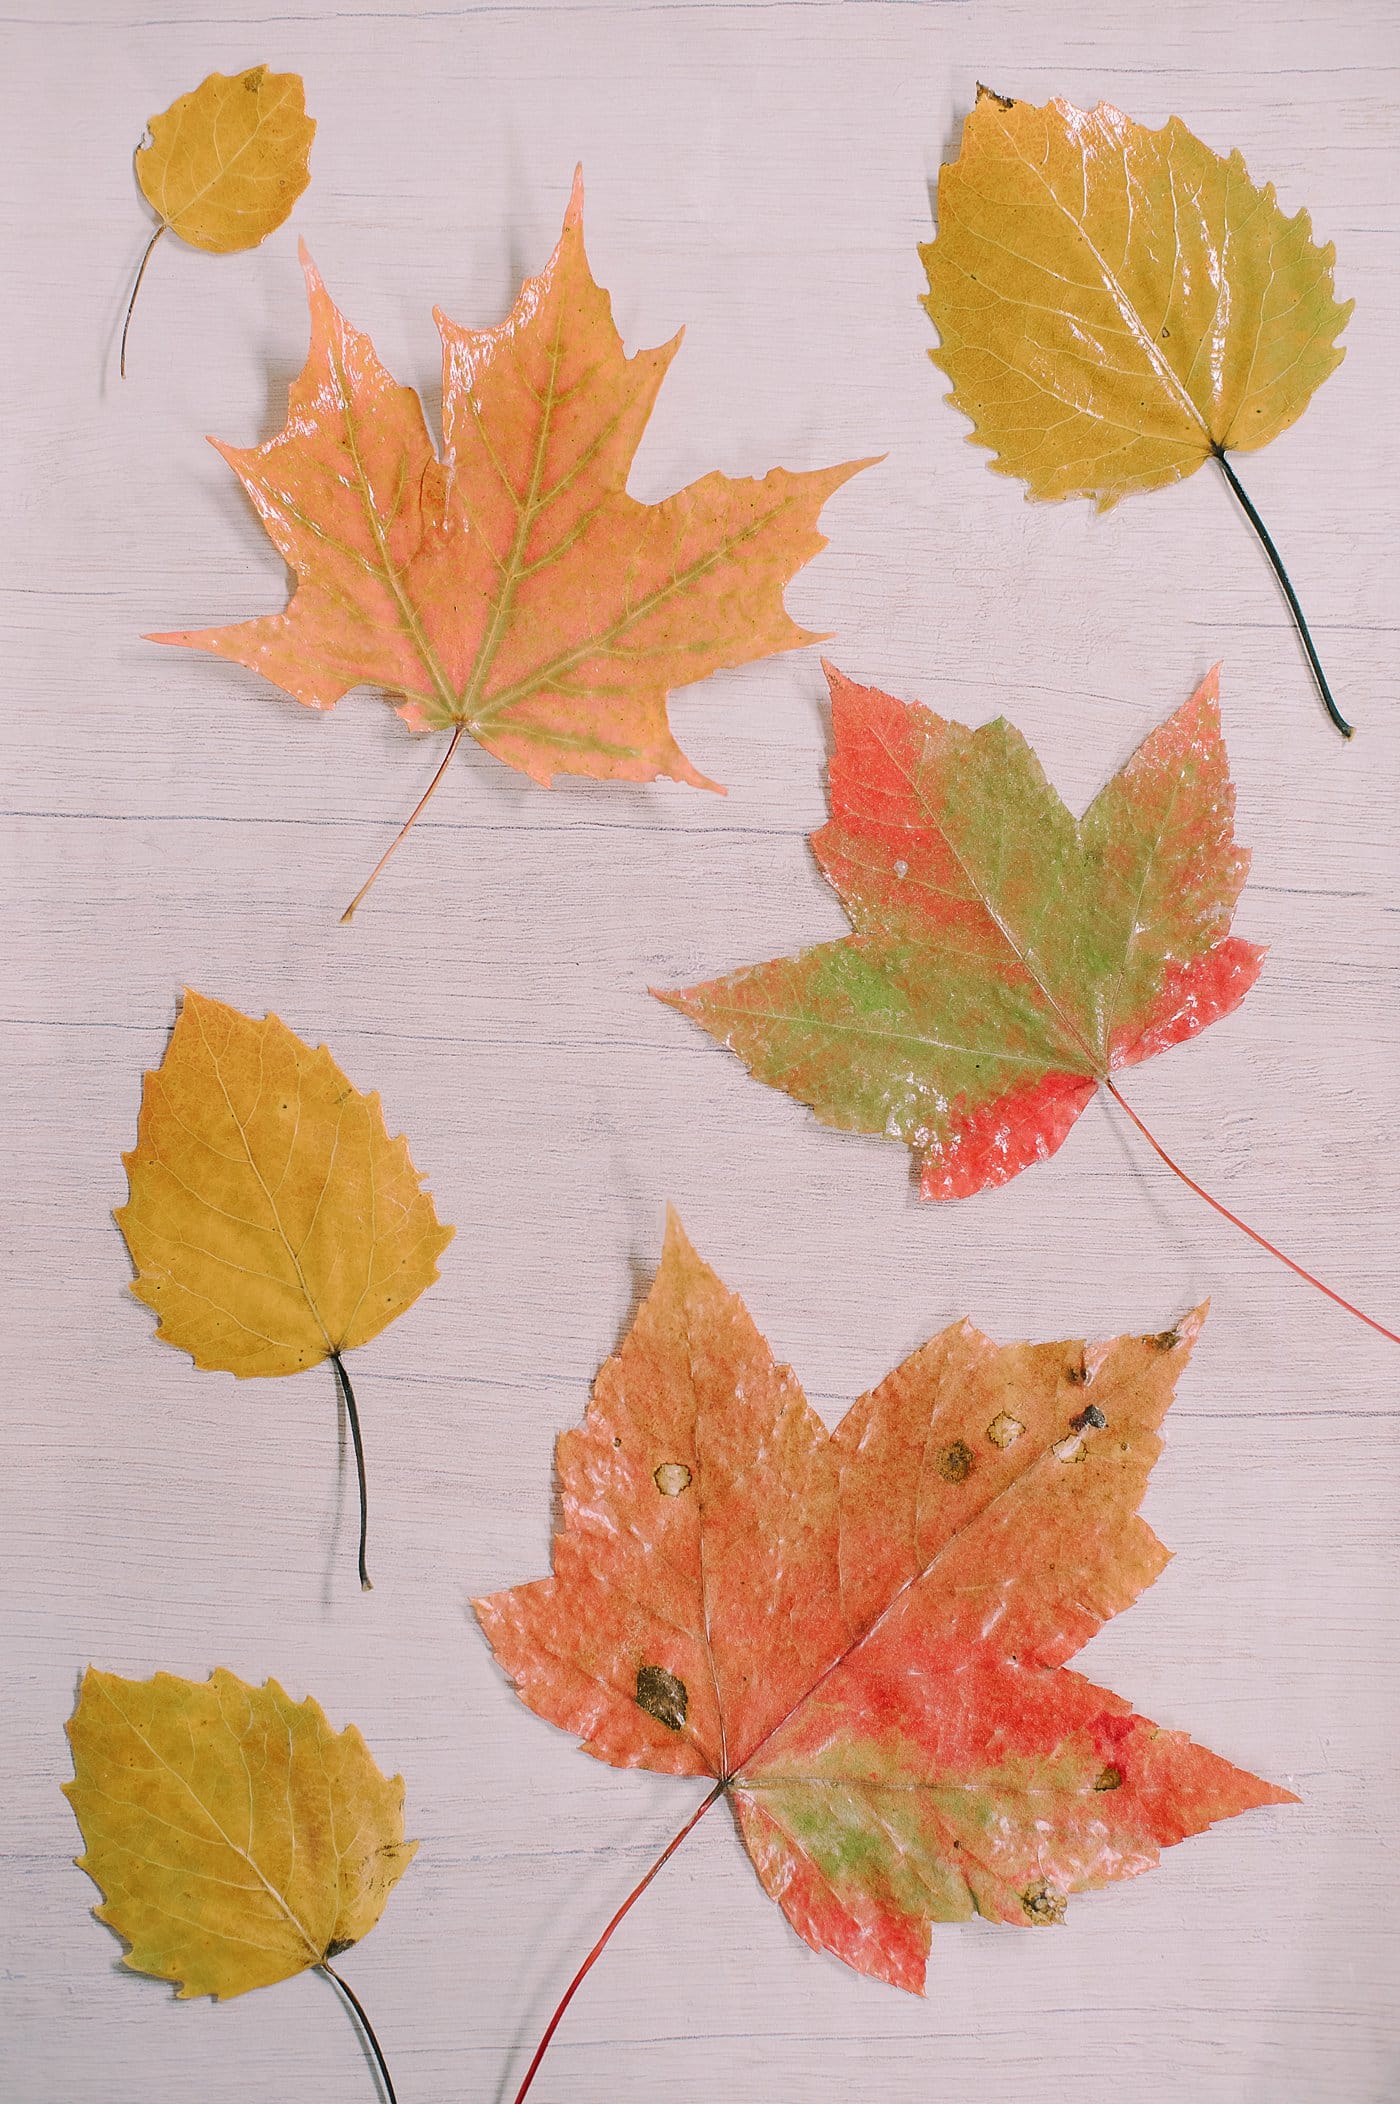 A look at matte vs gloss Mod Podge for preserving fall leaves by coating leaves in Mod Podge and seeing how they help coat them.